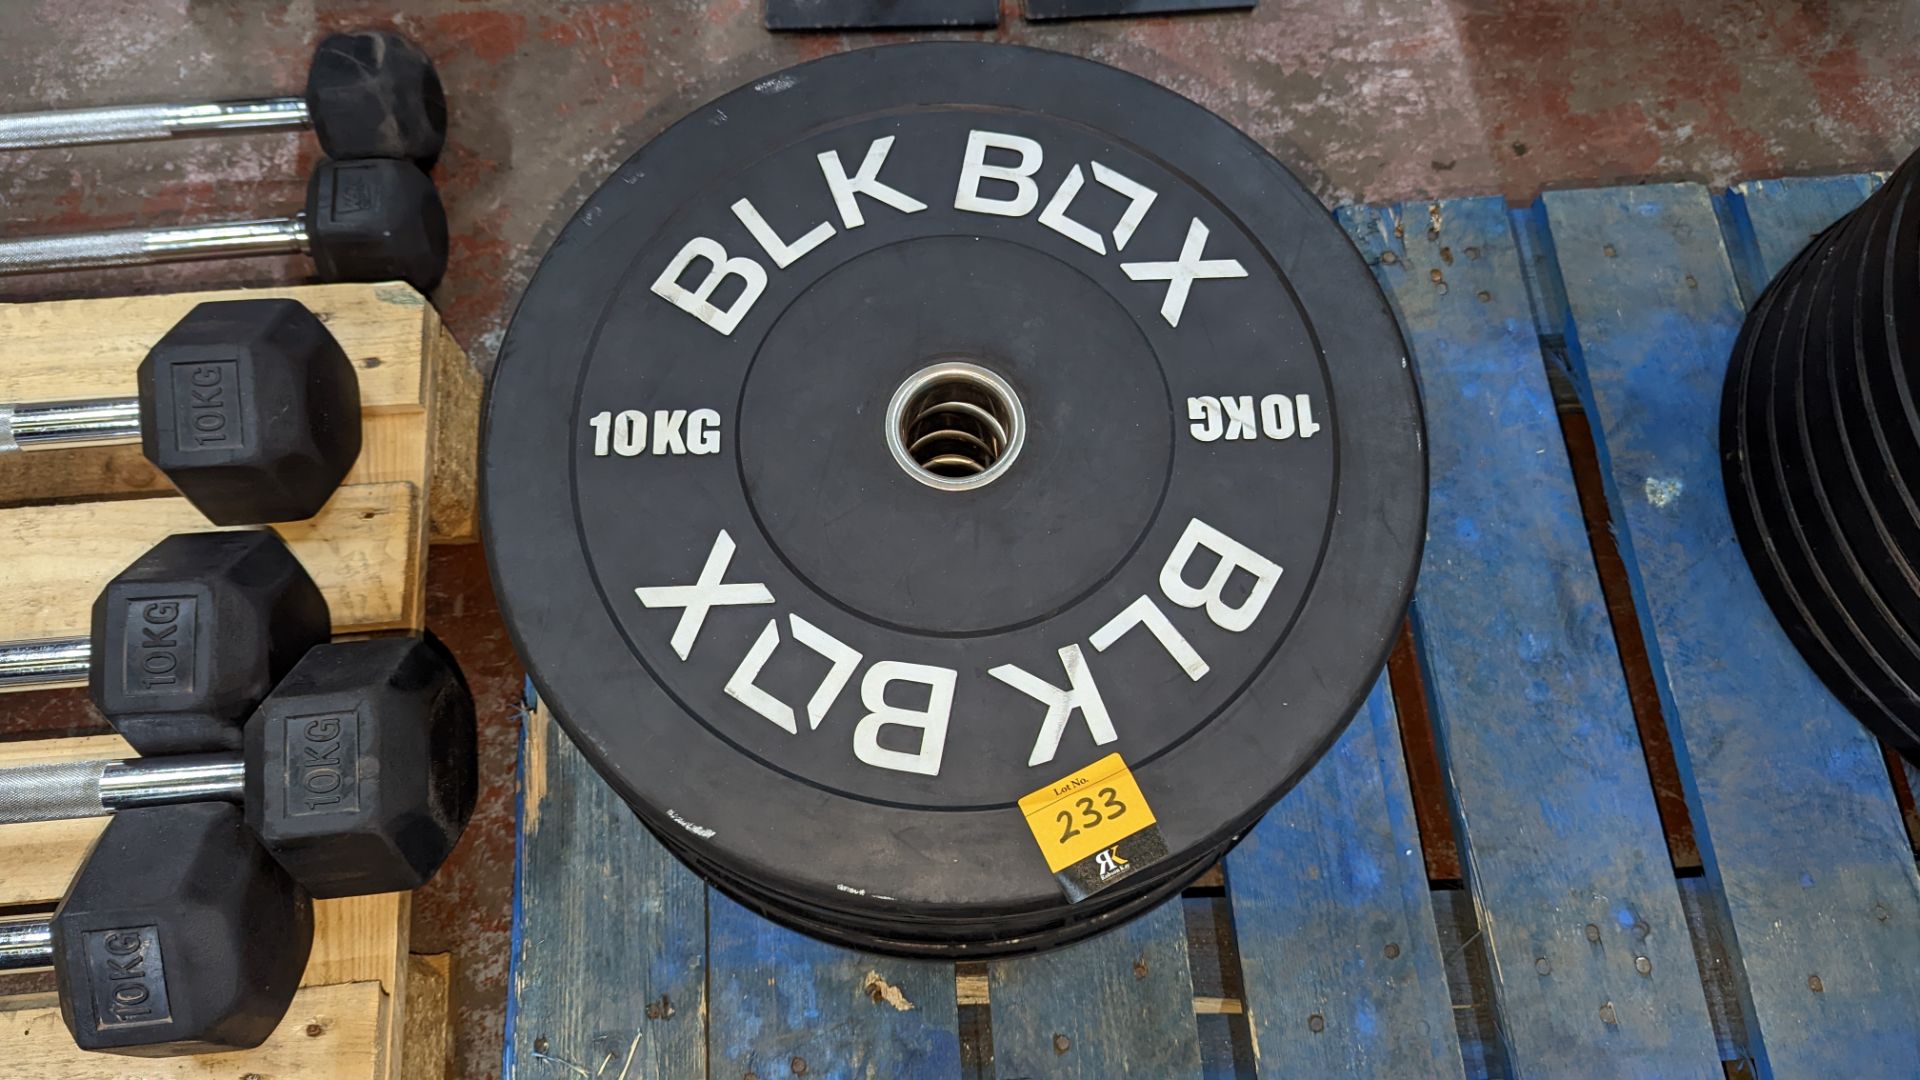 6 off BLKBOX 10kg rubberised Olympic plates - Image 2 of 3